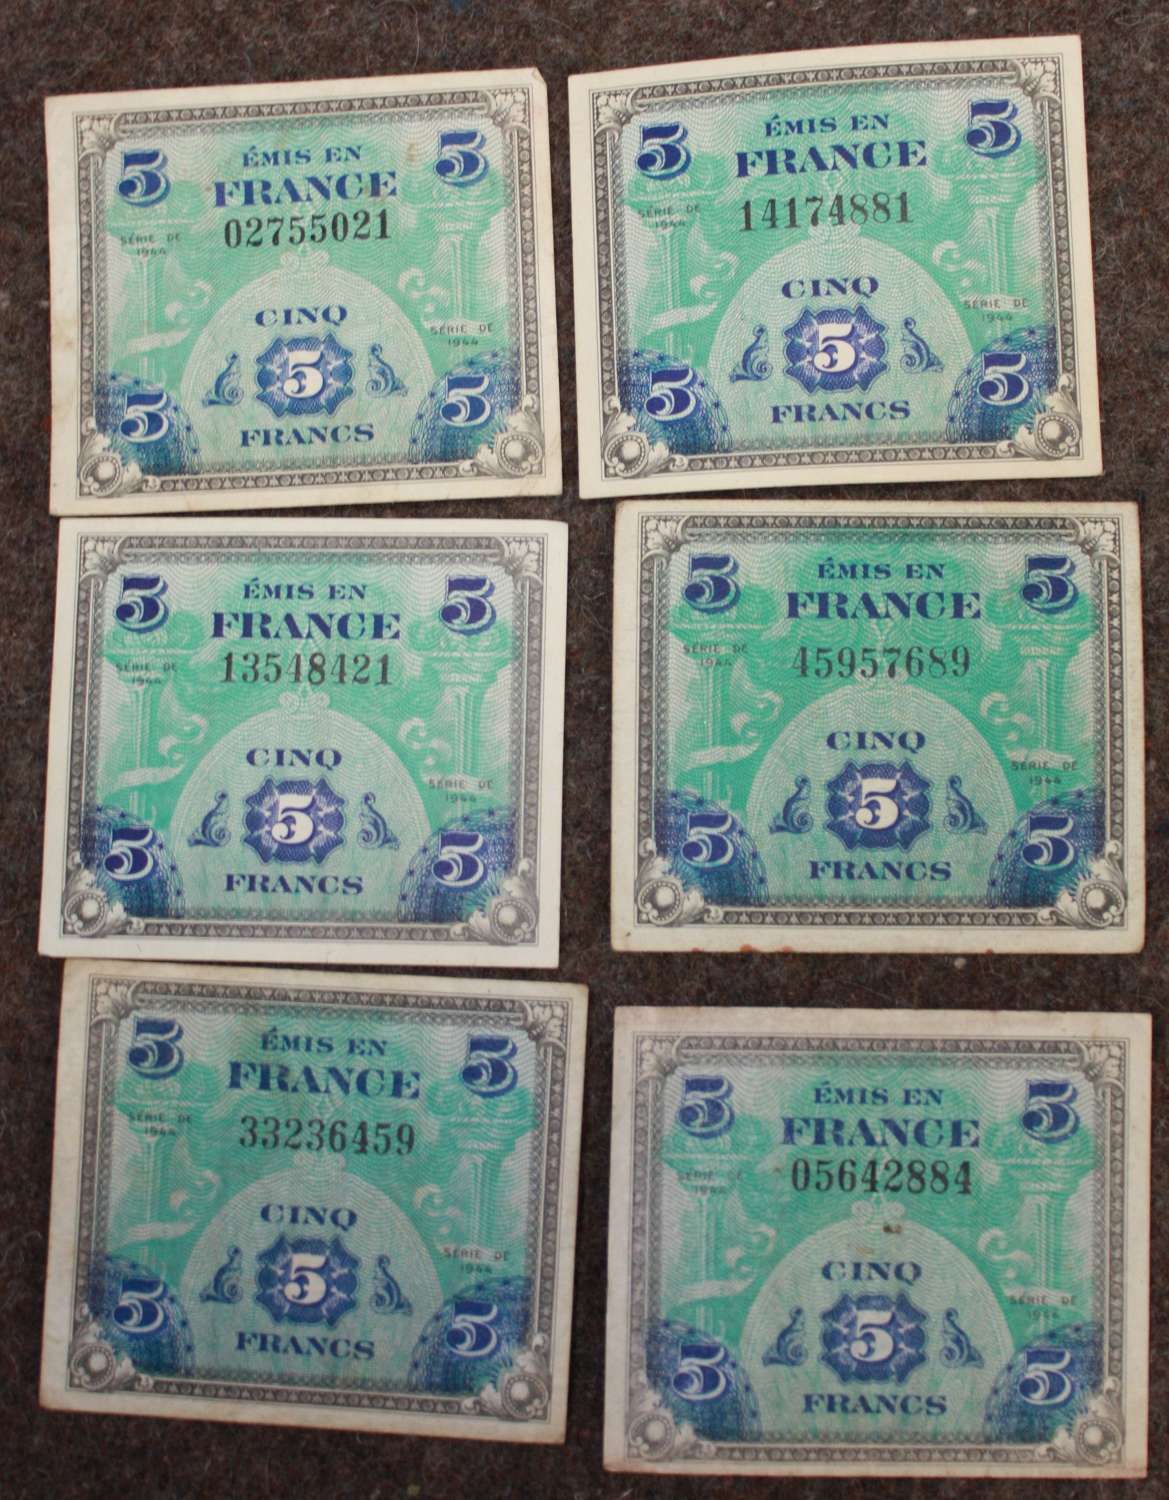 A COLLECTION OF WWII INVASION CURRENCY